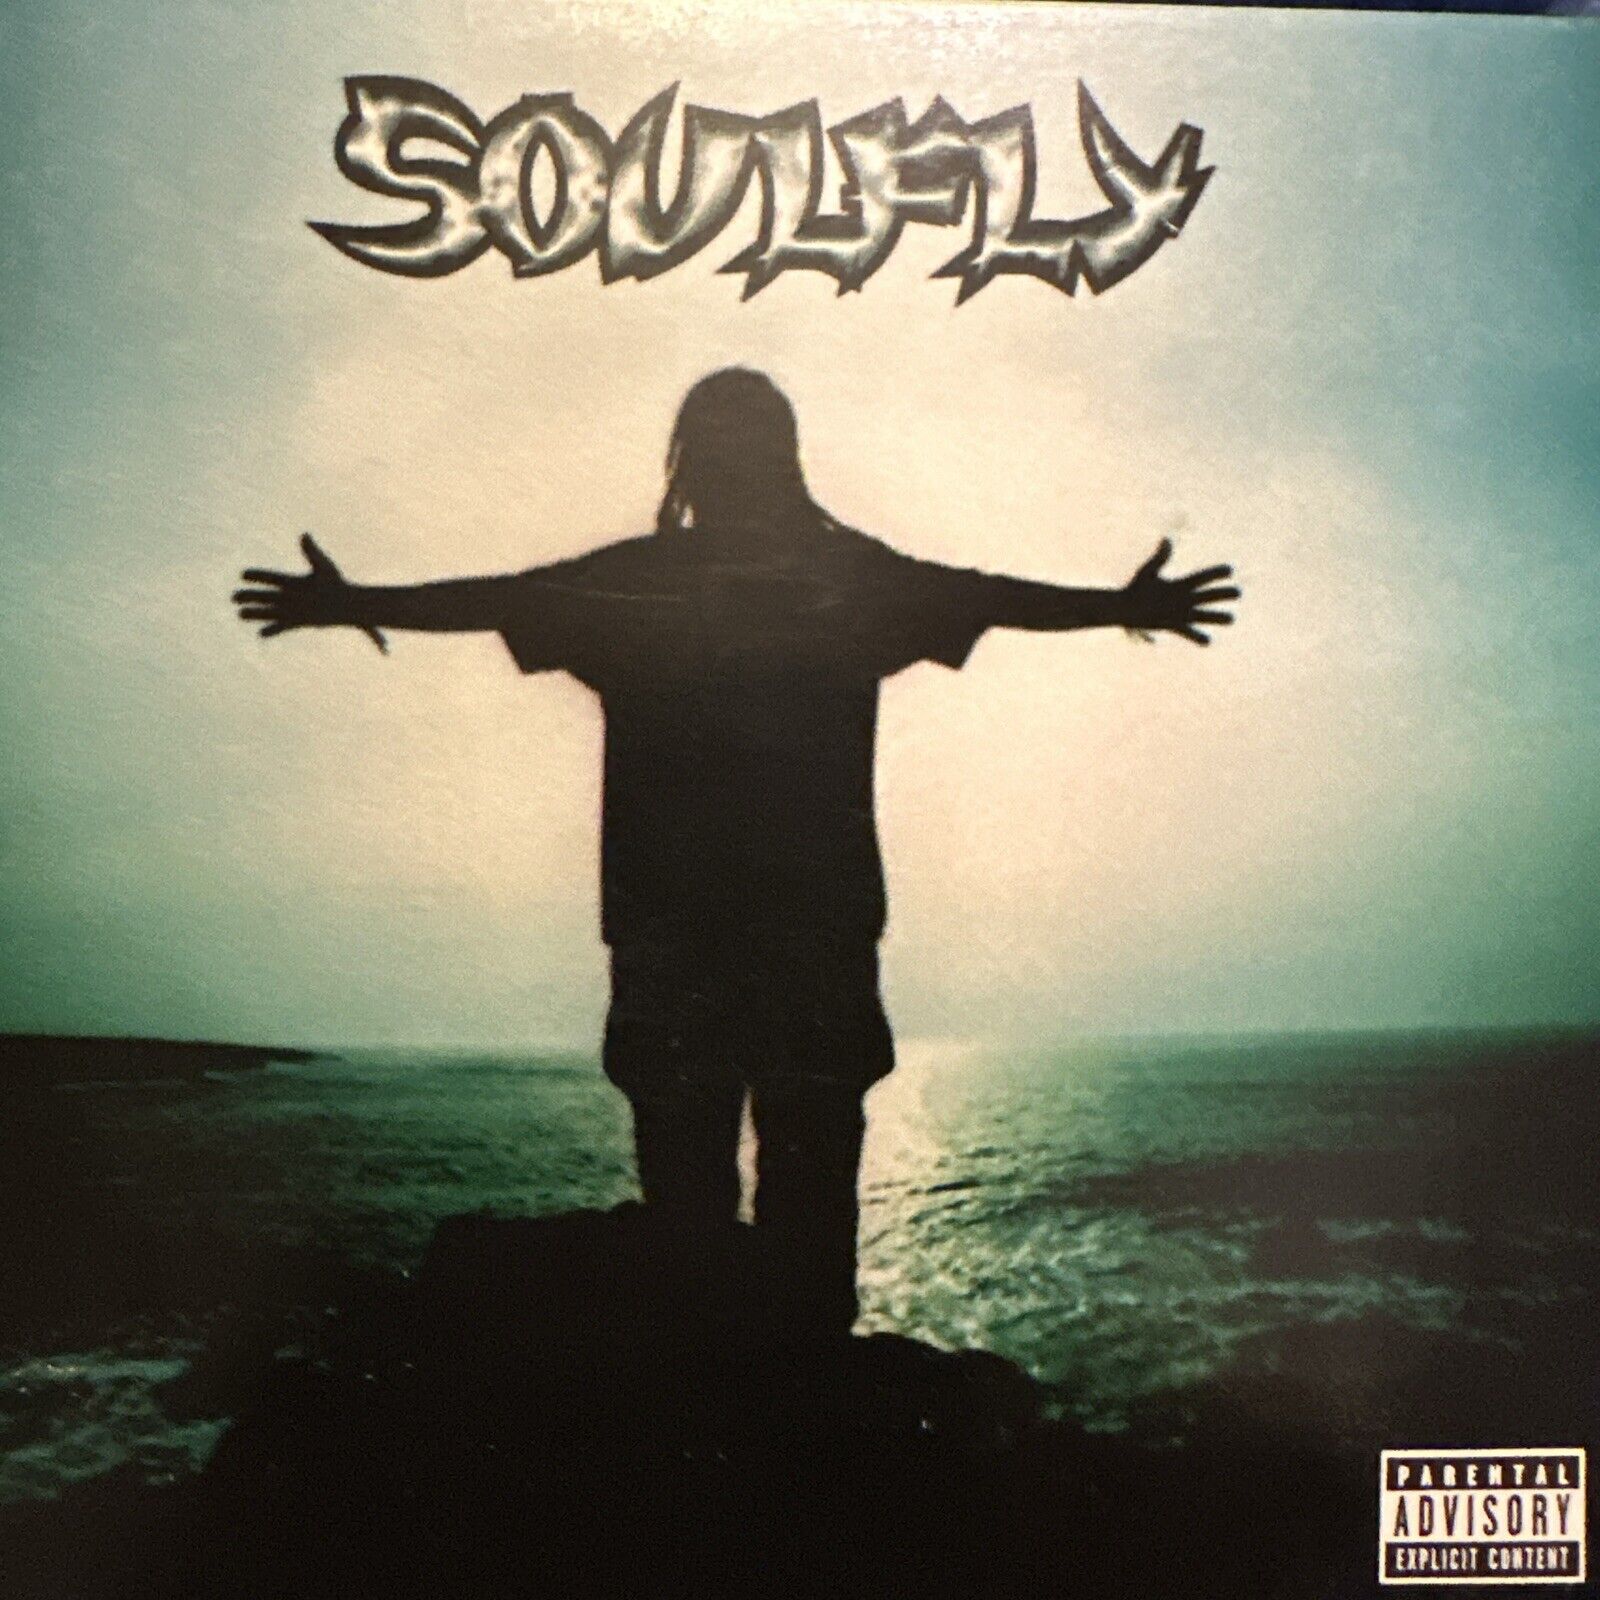 Heavy Metal, Cd Soulfly special Edition Two Disk  nice rare